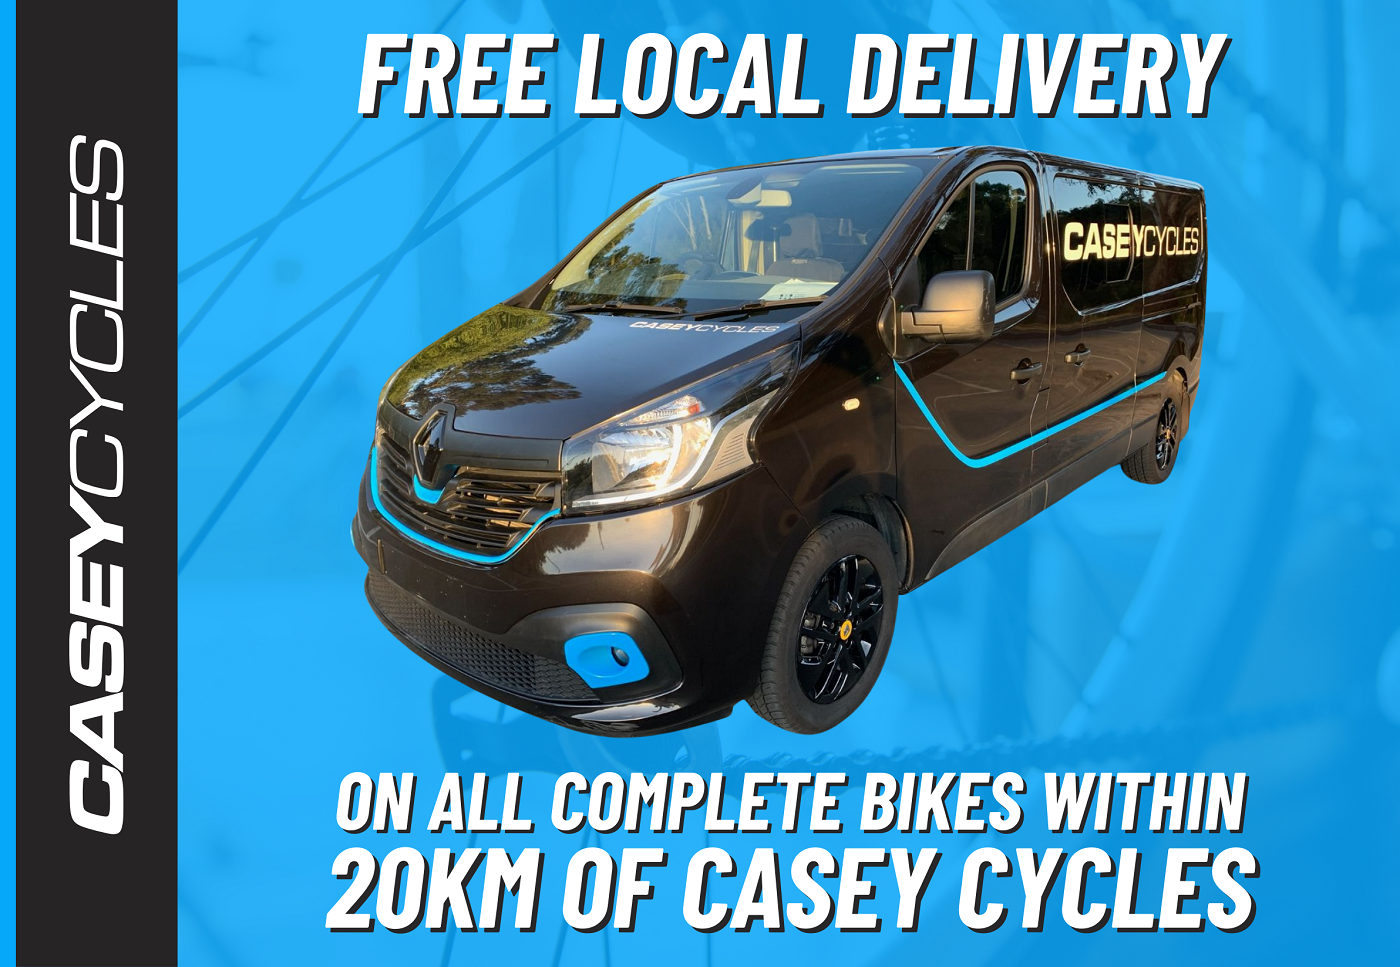 Buy any complete bike and receive free local delivery with 20km of Casey Cycles Cranbourne.